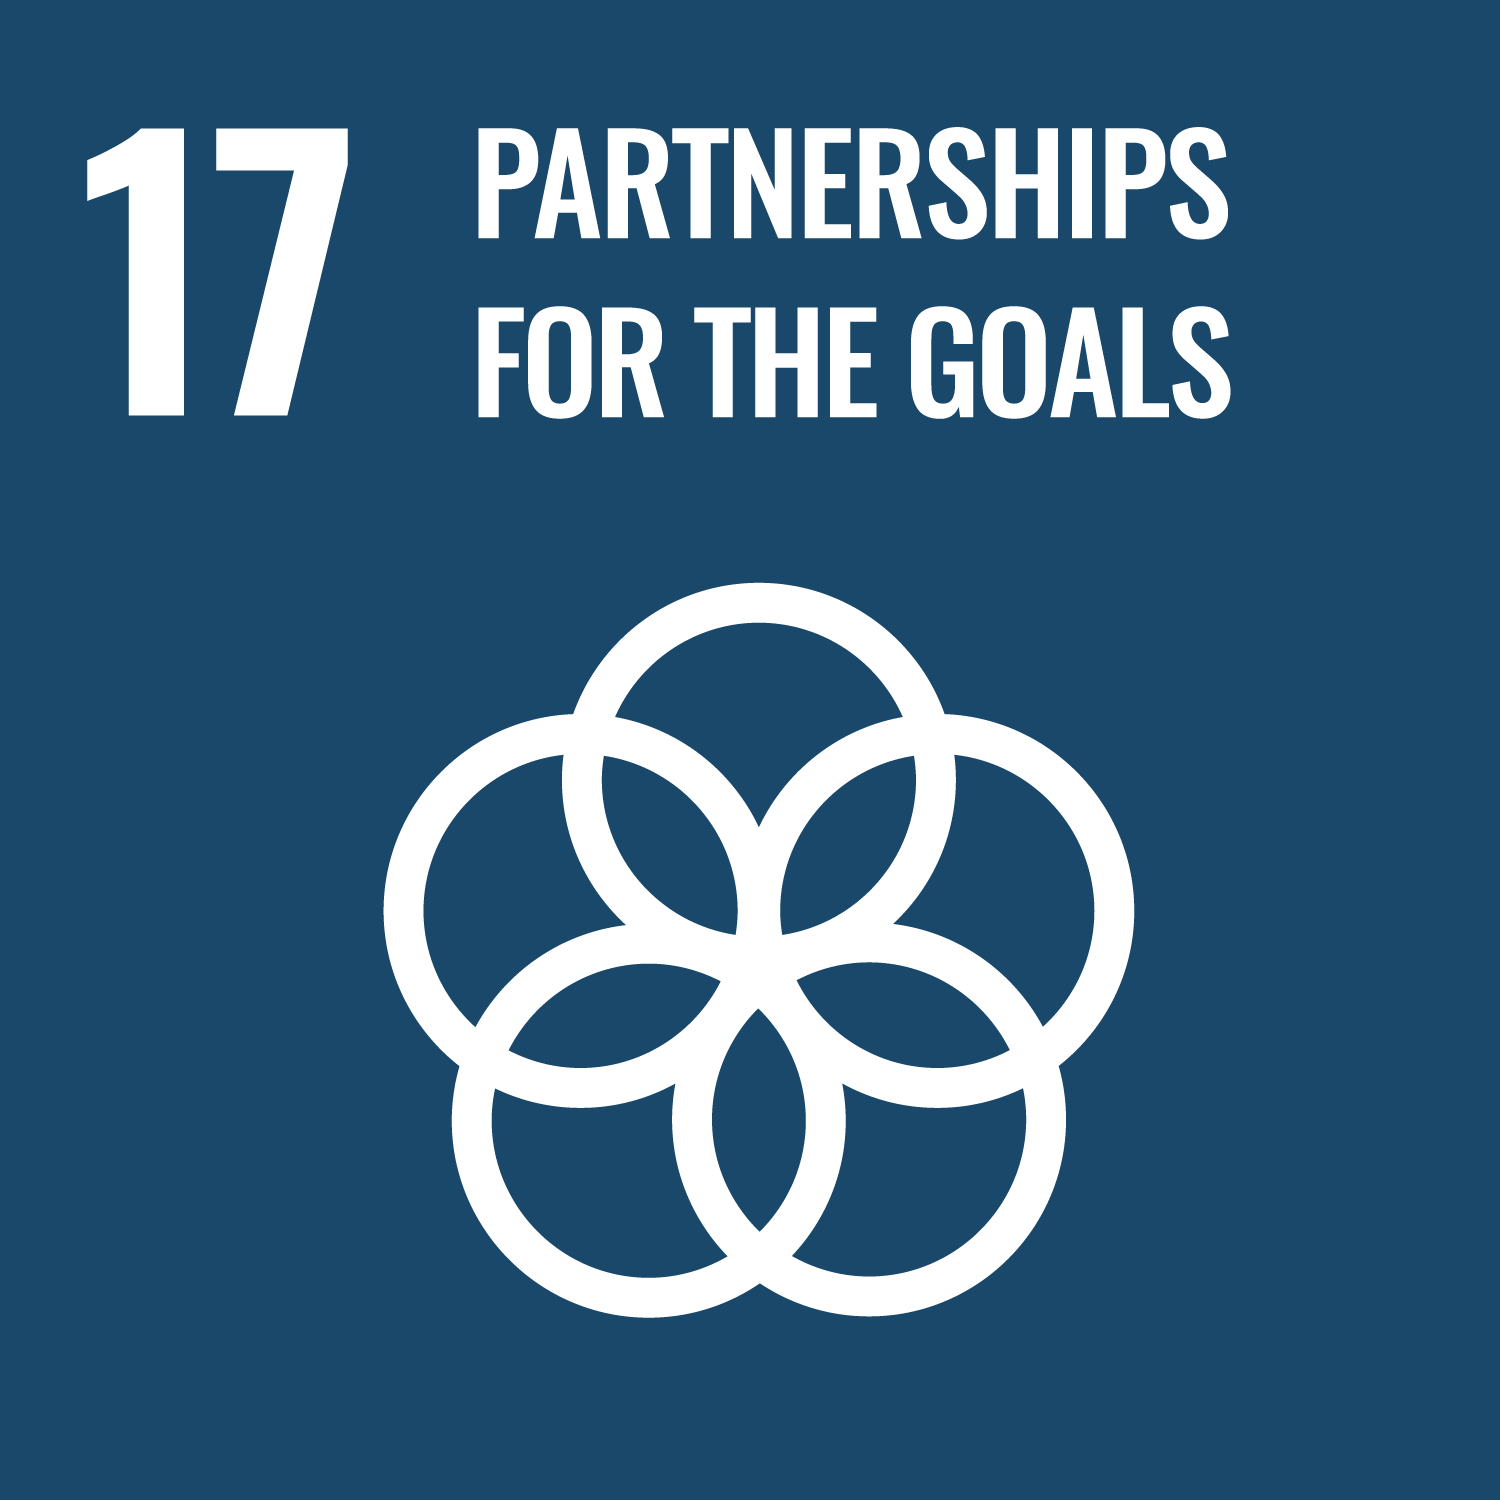 17 | PARTNERSHIPS FOR THE GOALS